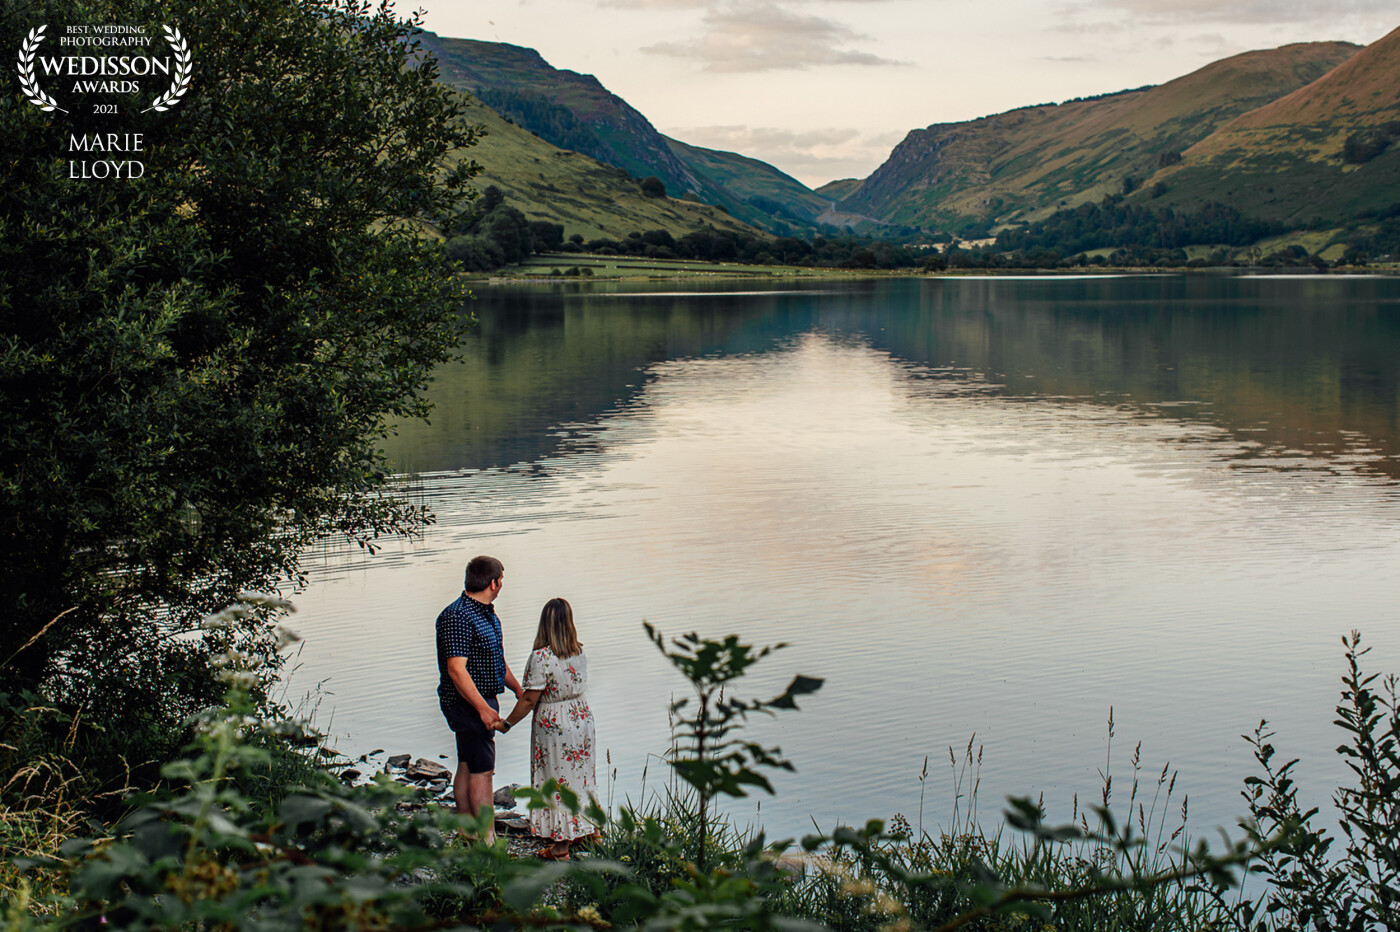 Couple looking out over the reservoir, the light is fading and creating a lovely leading line across the water, with the foliage creating a delicate frame for the couple.